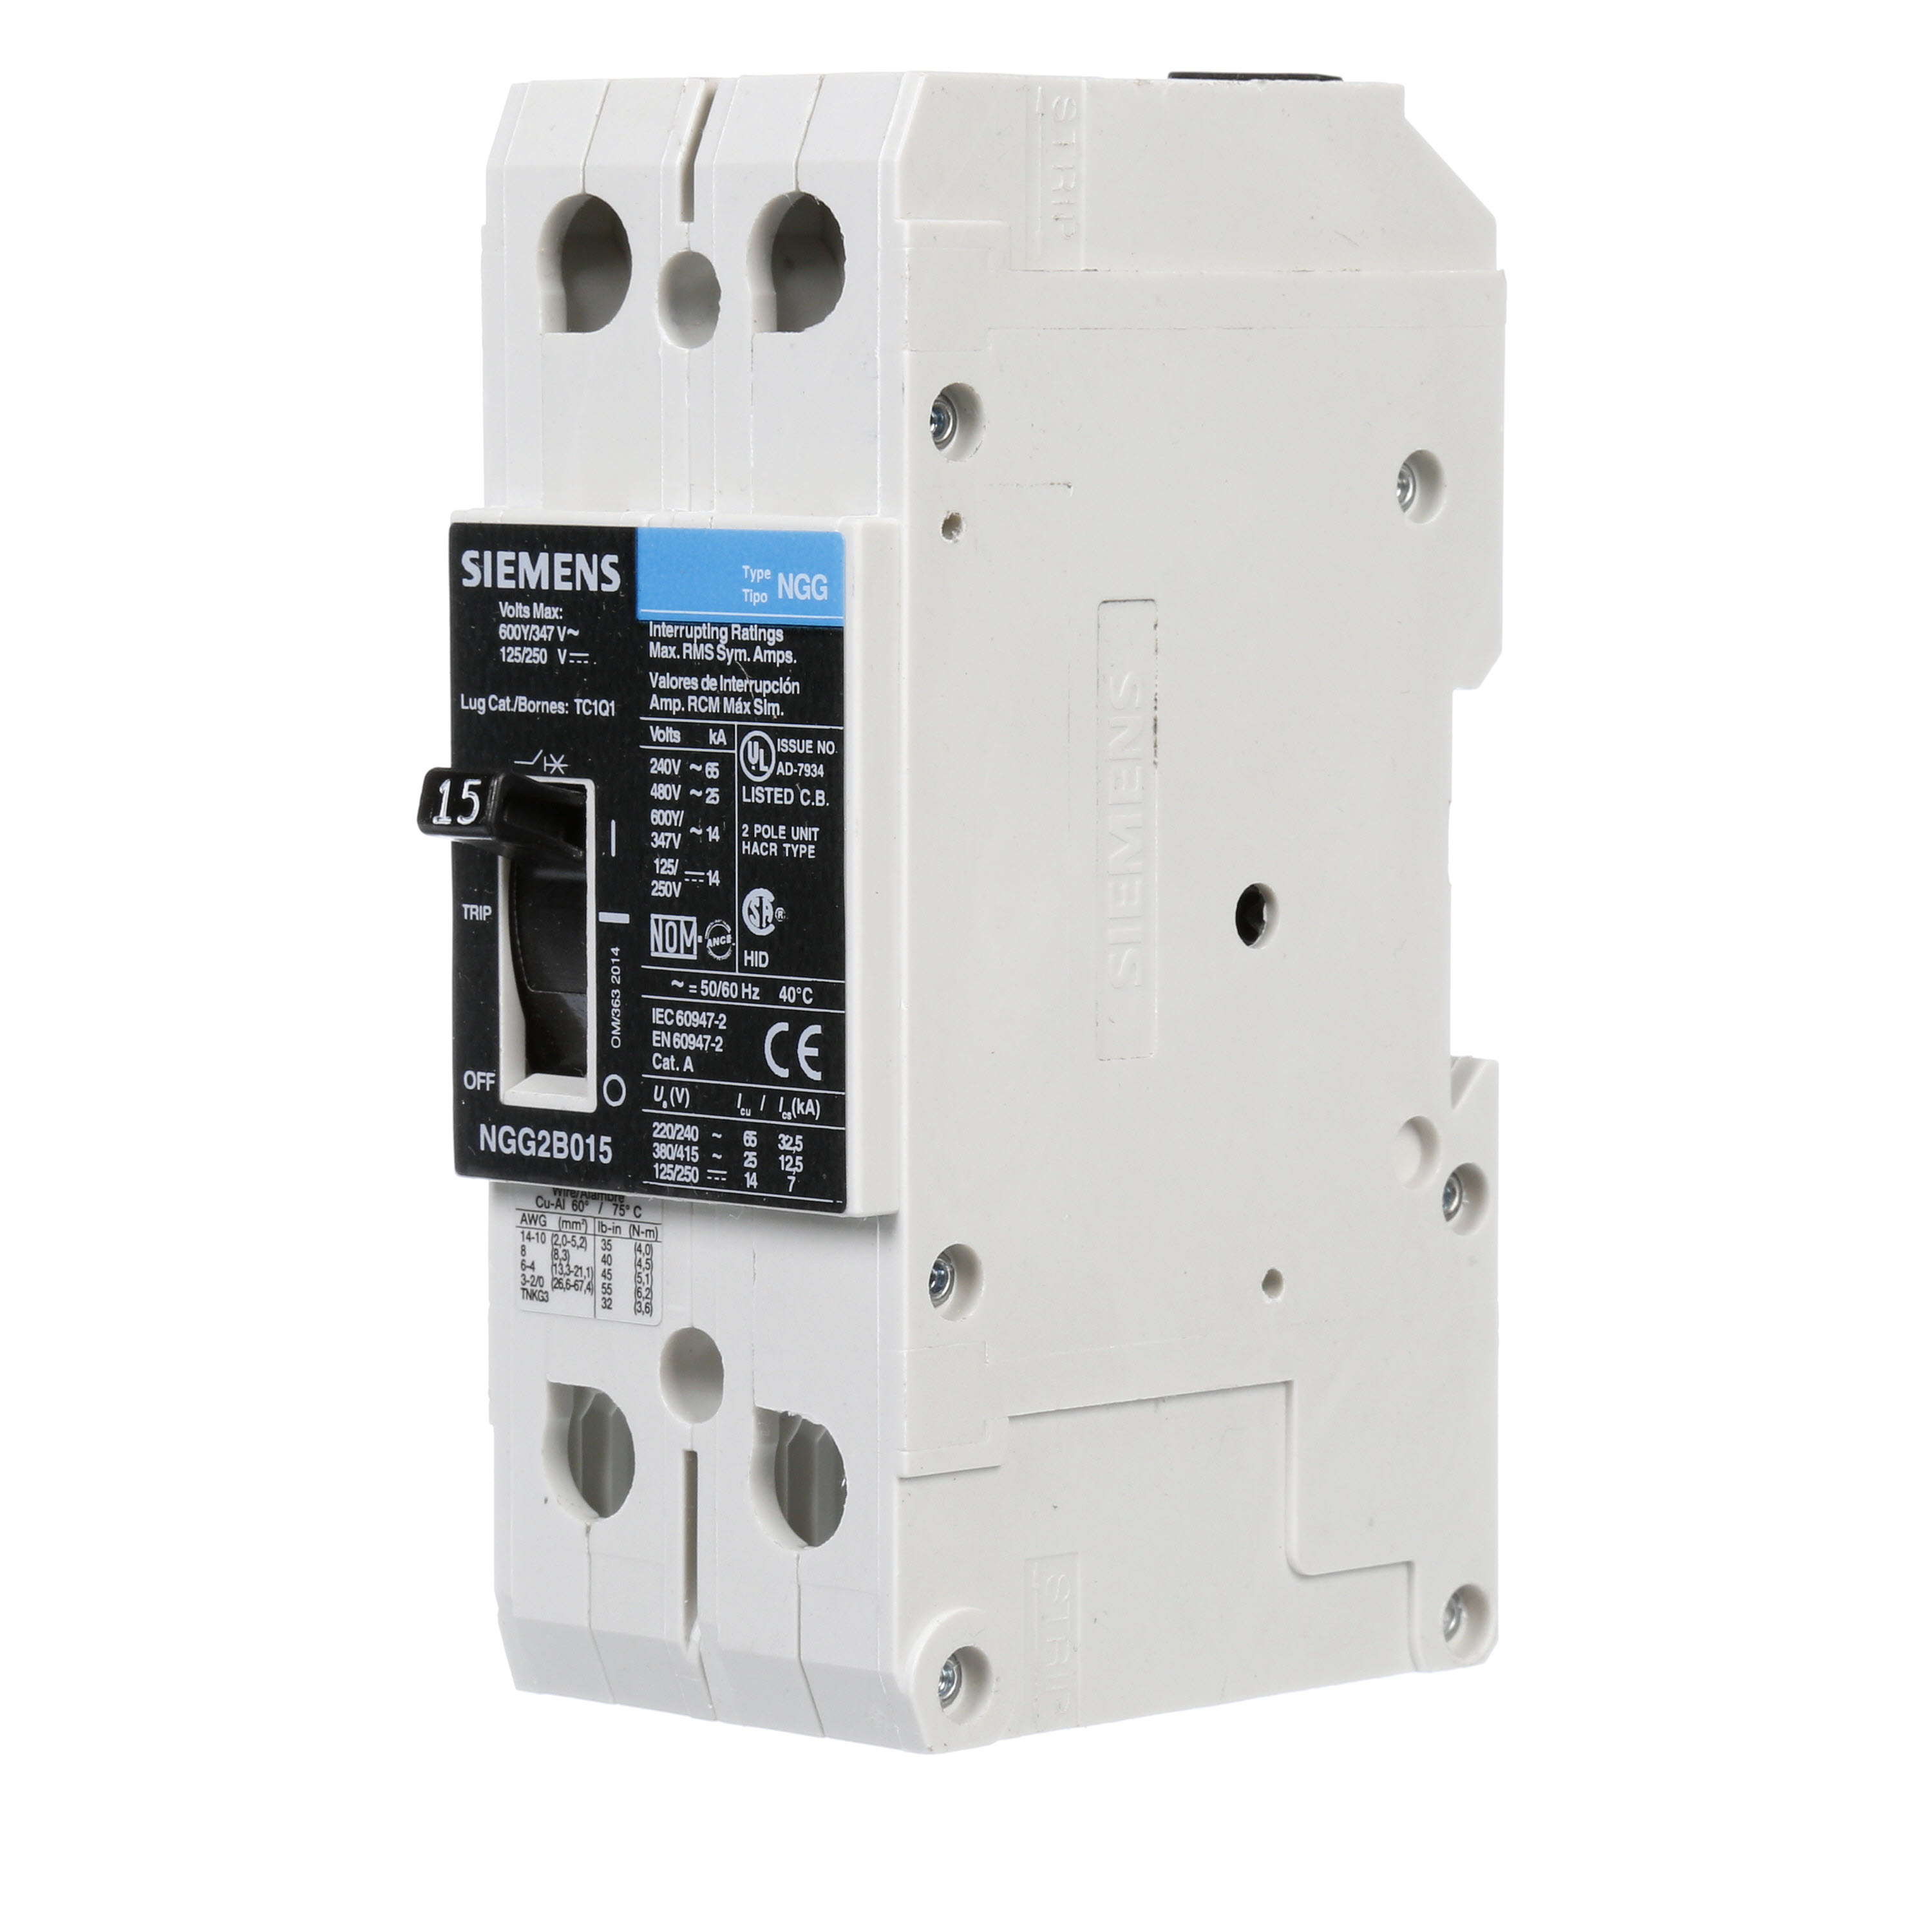 SIEMENS LOW VOLTAGE G FRAME CIRCUIT BREAKER WITH THERMAL - MAGNETIC TRIP. UL LISTED NGG FRAME WITH STANDARD BREAKING CAPACITY. 15A 2-POLE (14KAIC AT 600Y/347V)(25KAIC AT 480V). SPECIAL FEATURES MOUNTS ON DIN RAIL / SCREW, LINE AND LOAD SIDE LUGS (TC1Q1) WIRE RANGE 14 - 10 AWS (CU/AL). DIMENSIONS (W x H x D) IN 2 x 5.4 x 2.8.